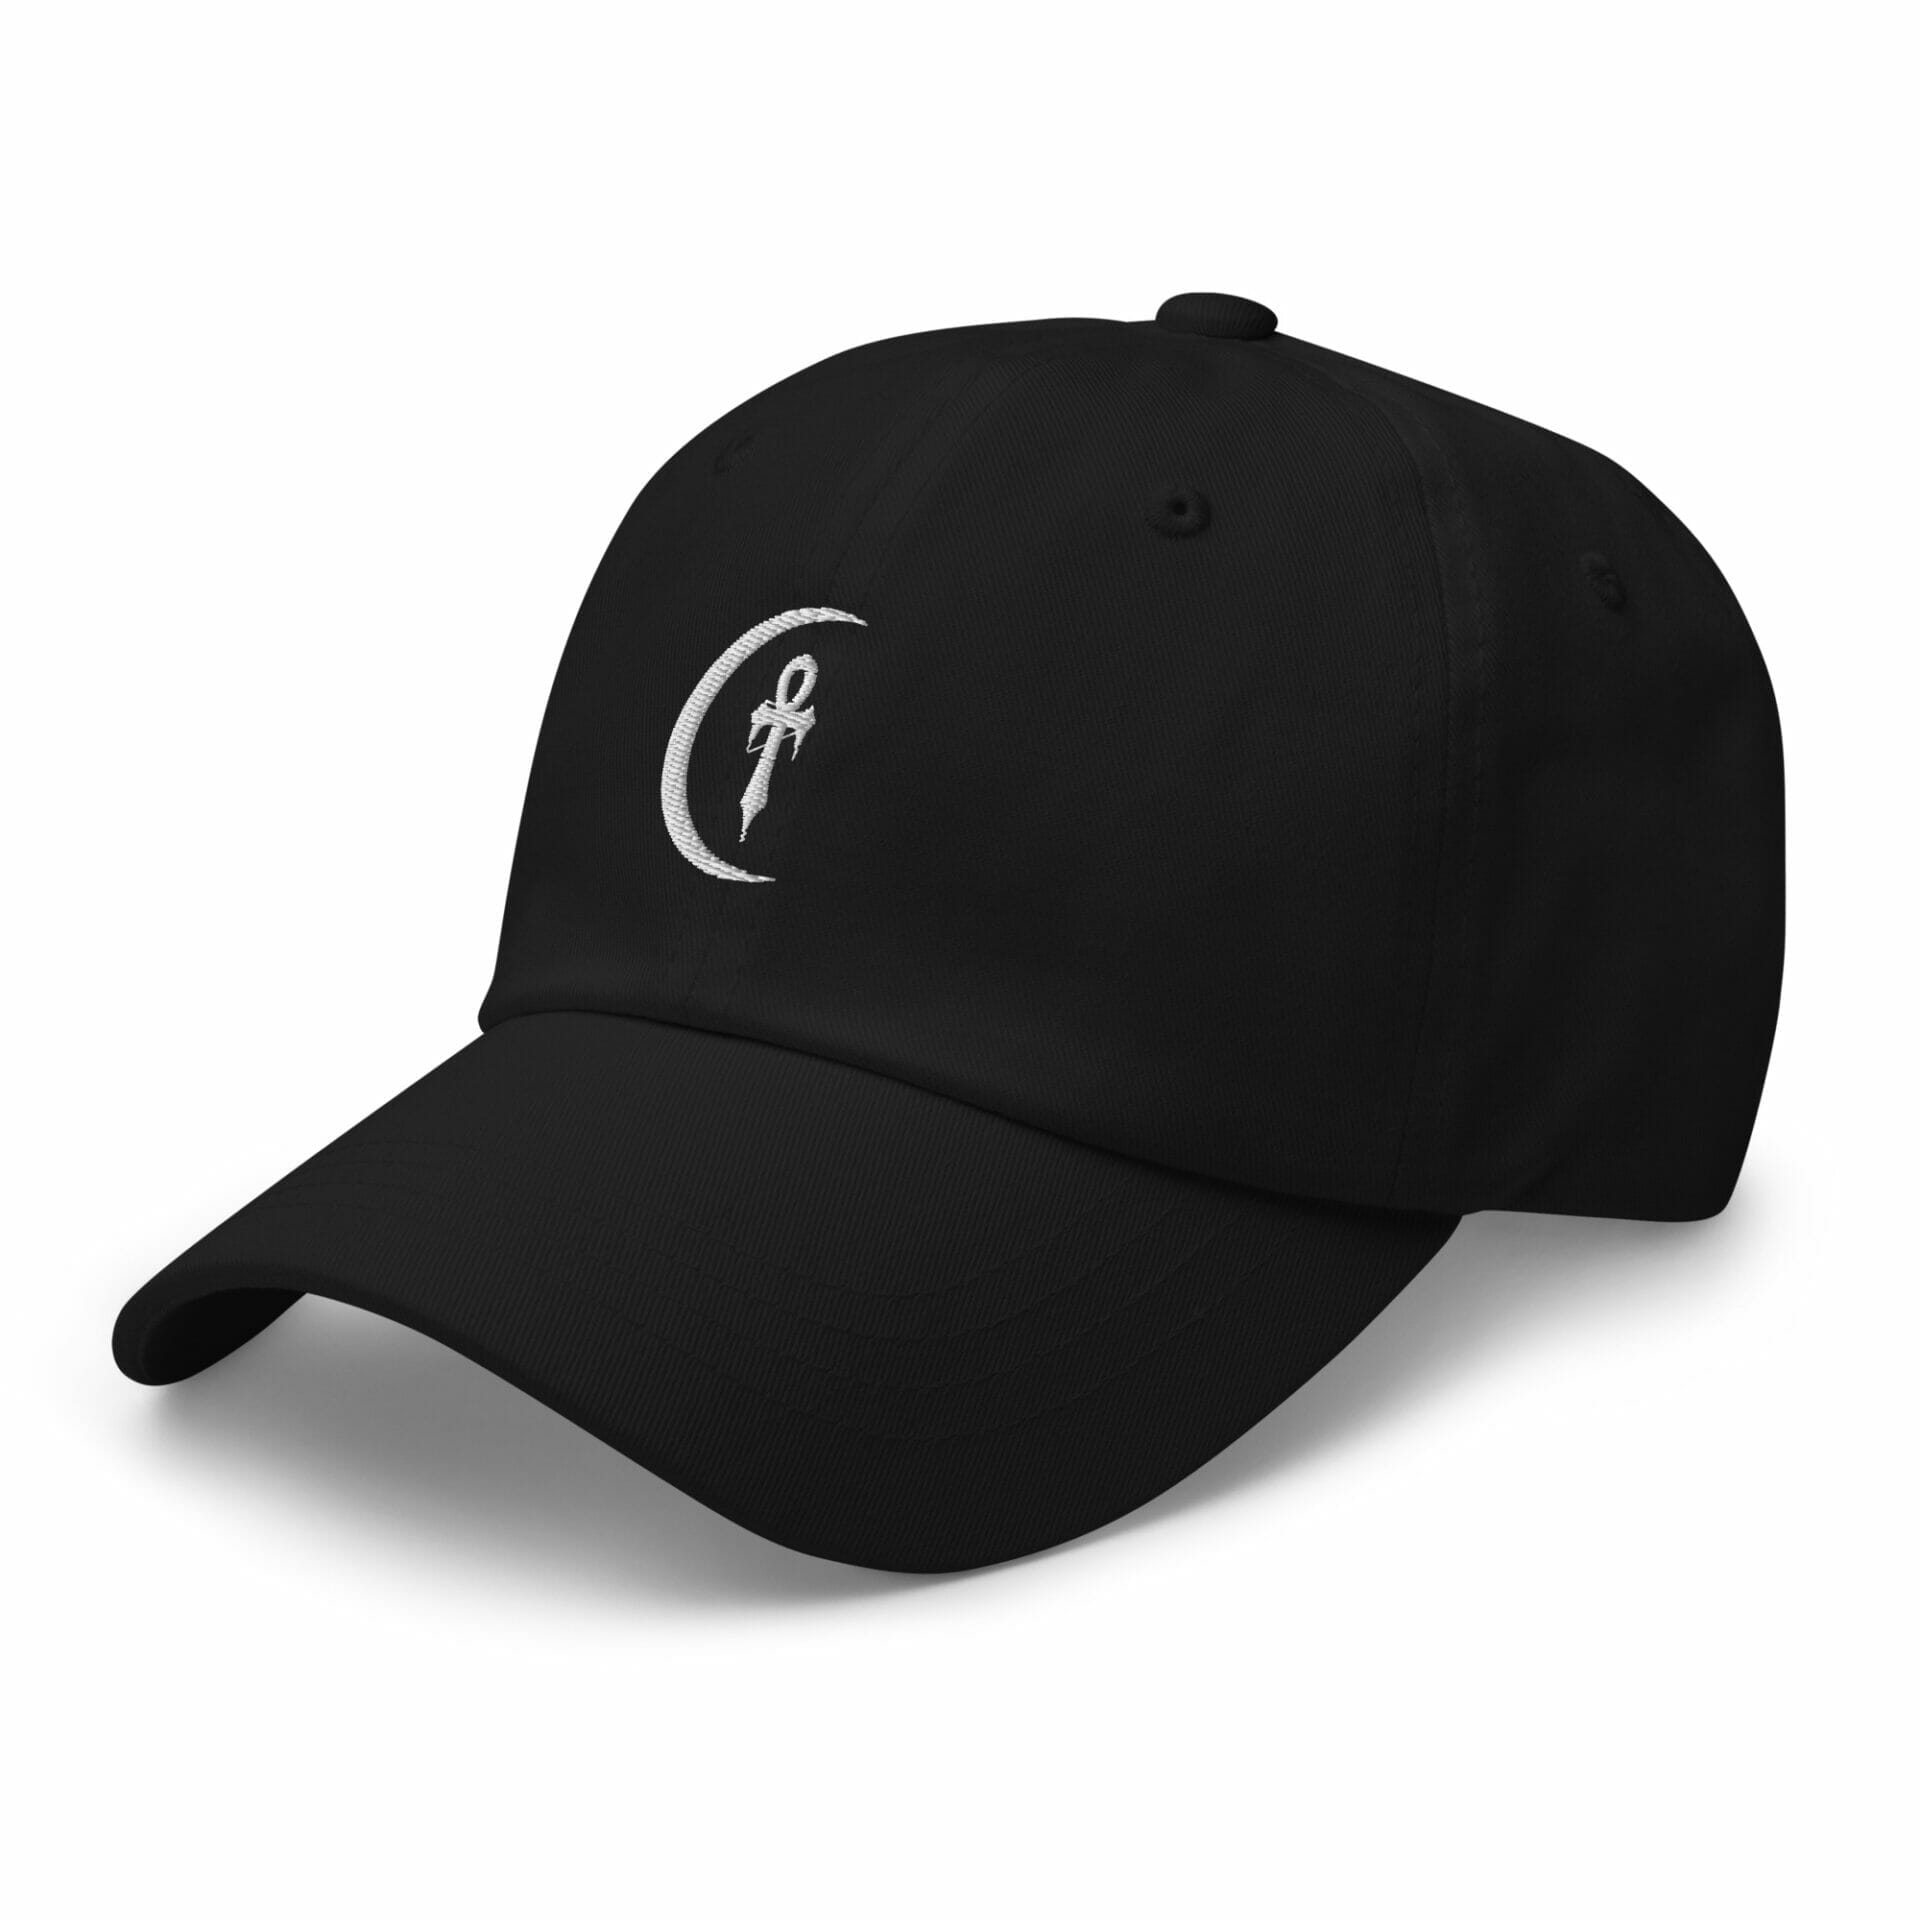 classic-dad-hat-black-left-front-6495dac288a62